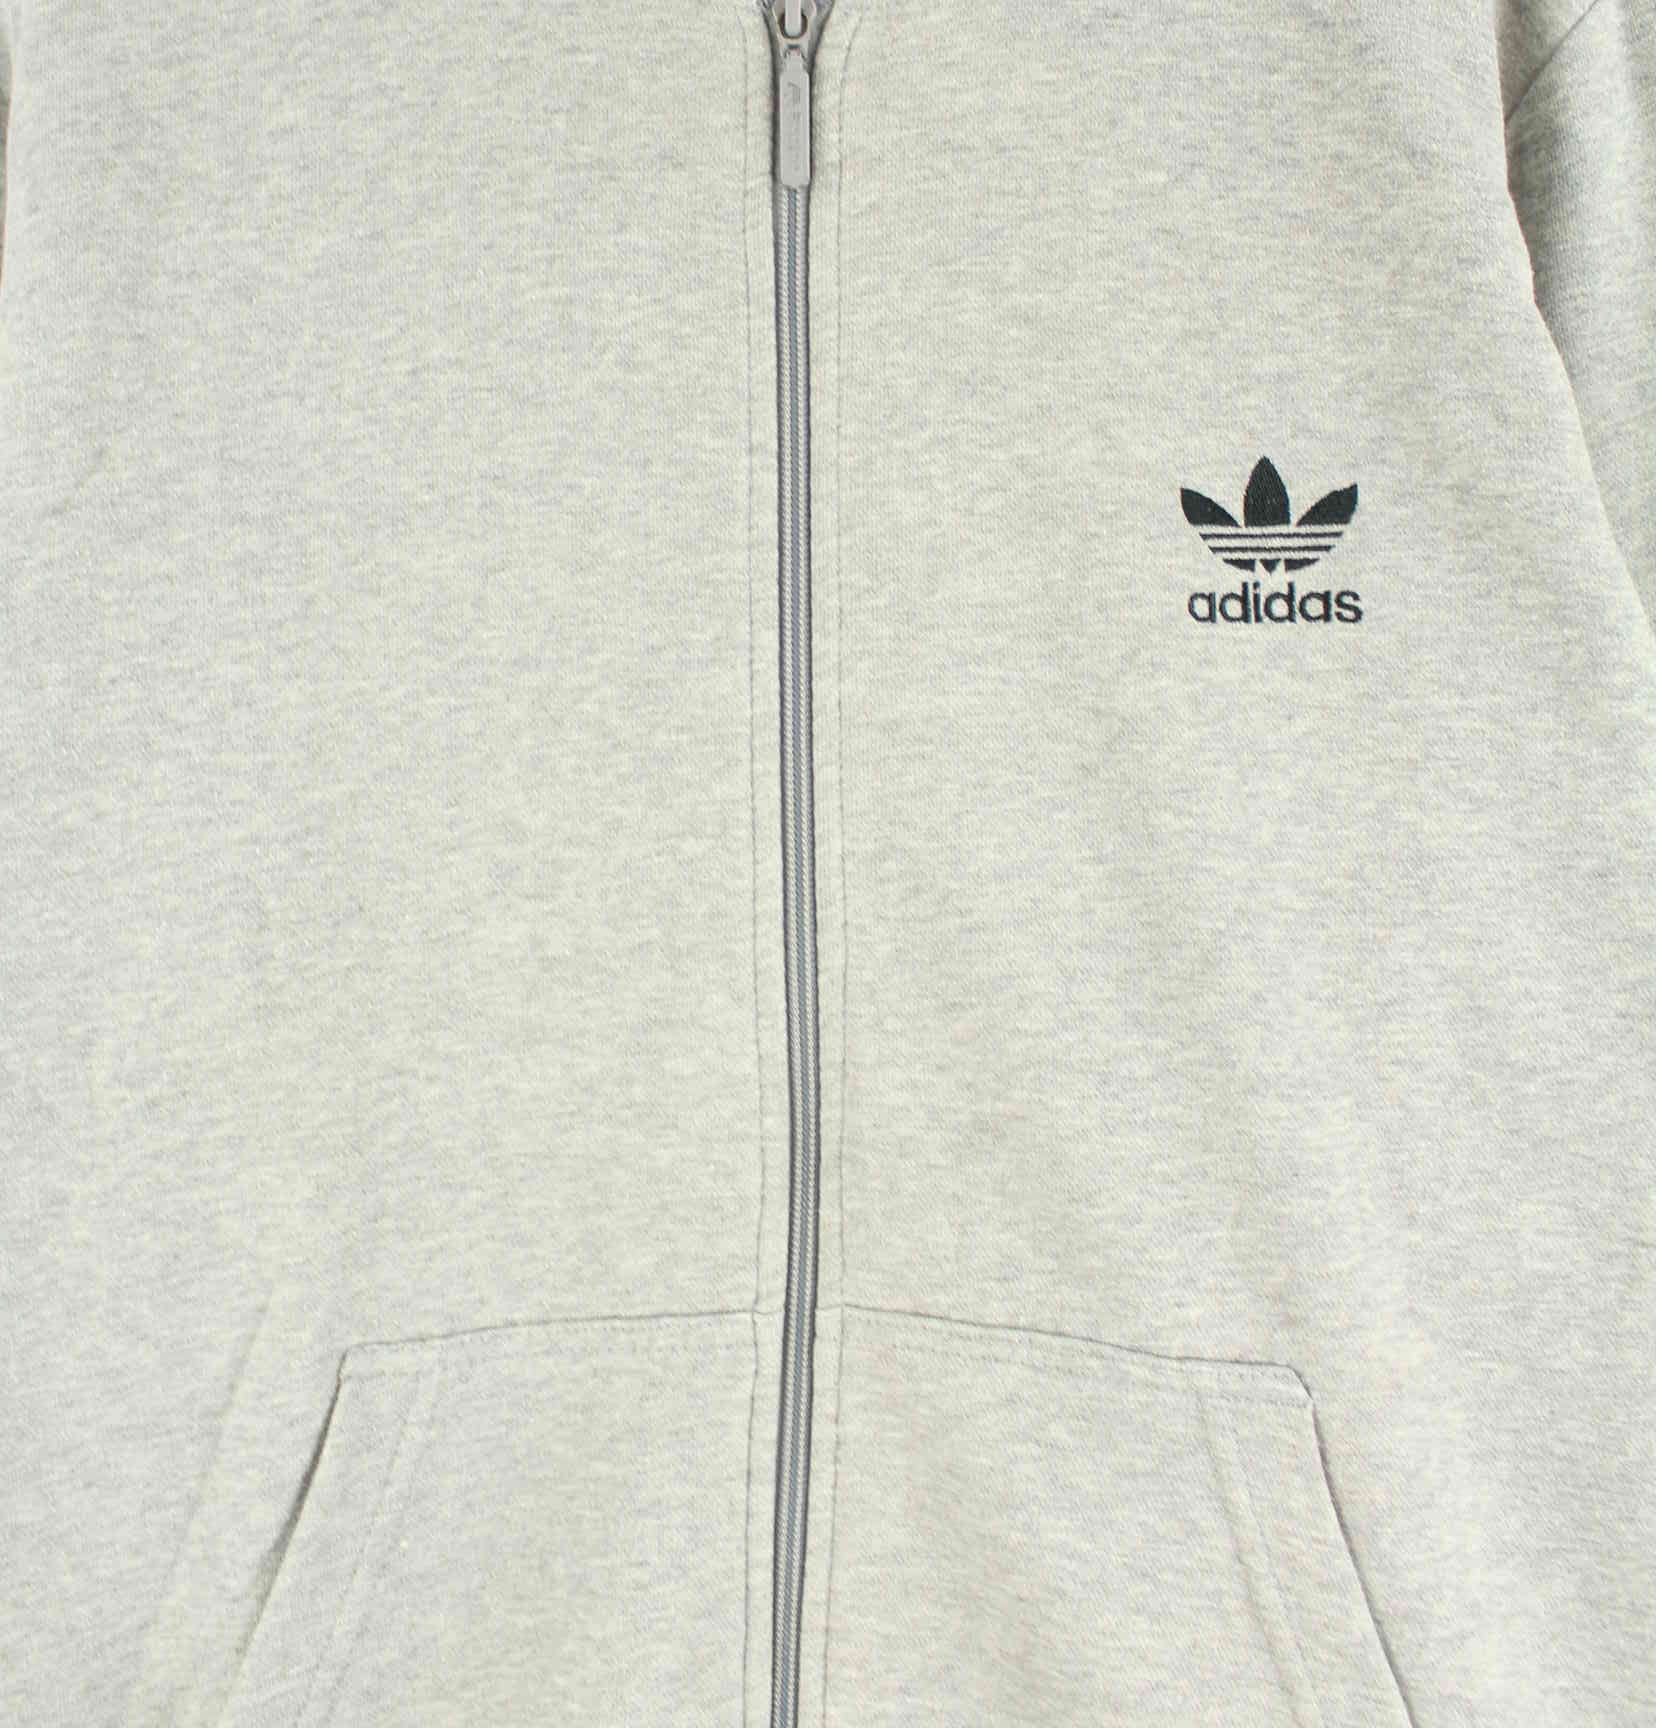 Adidas Spellout Embroidered Zip Hoodie Grau L (detail image 1)